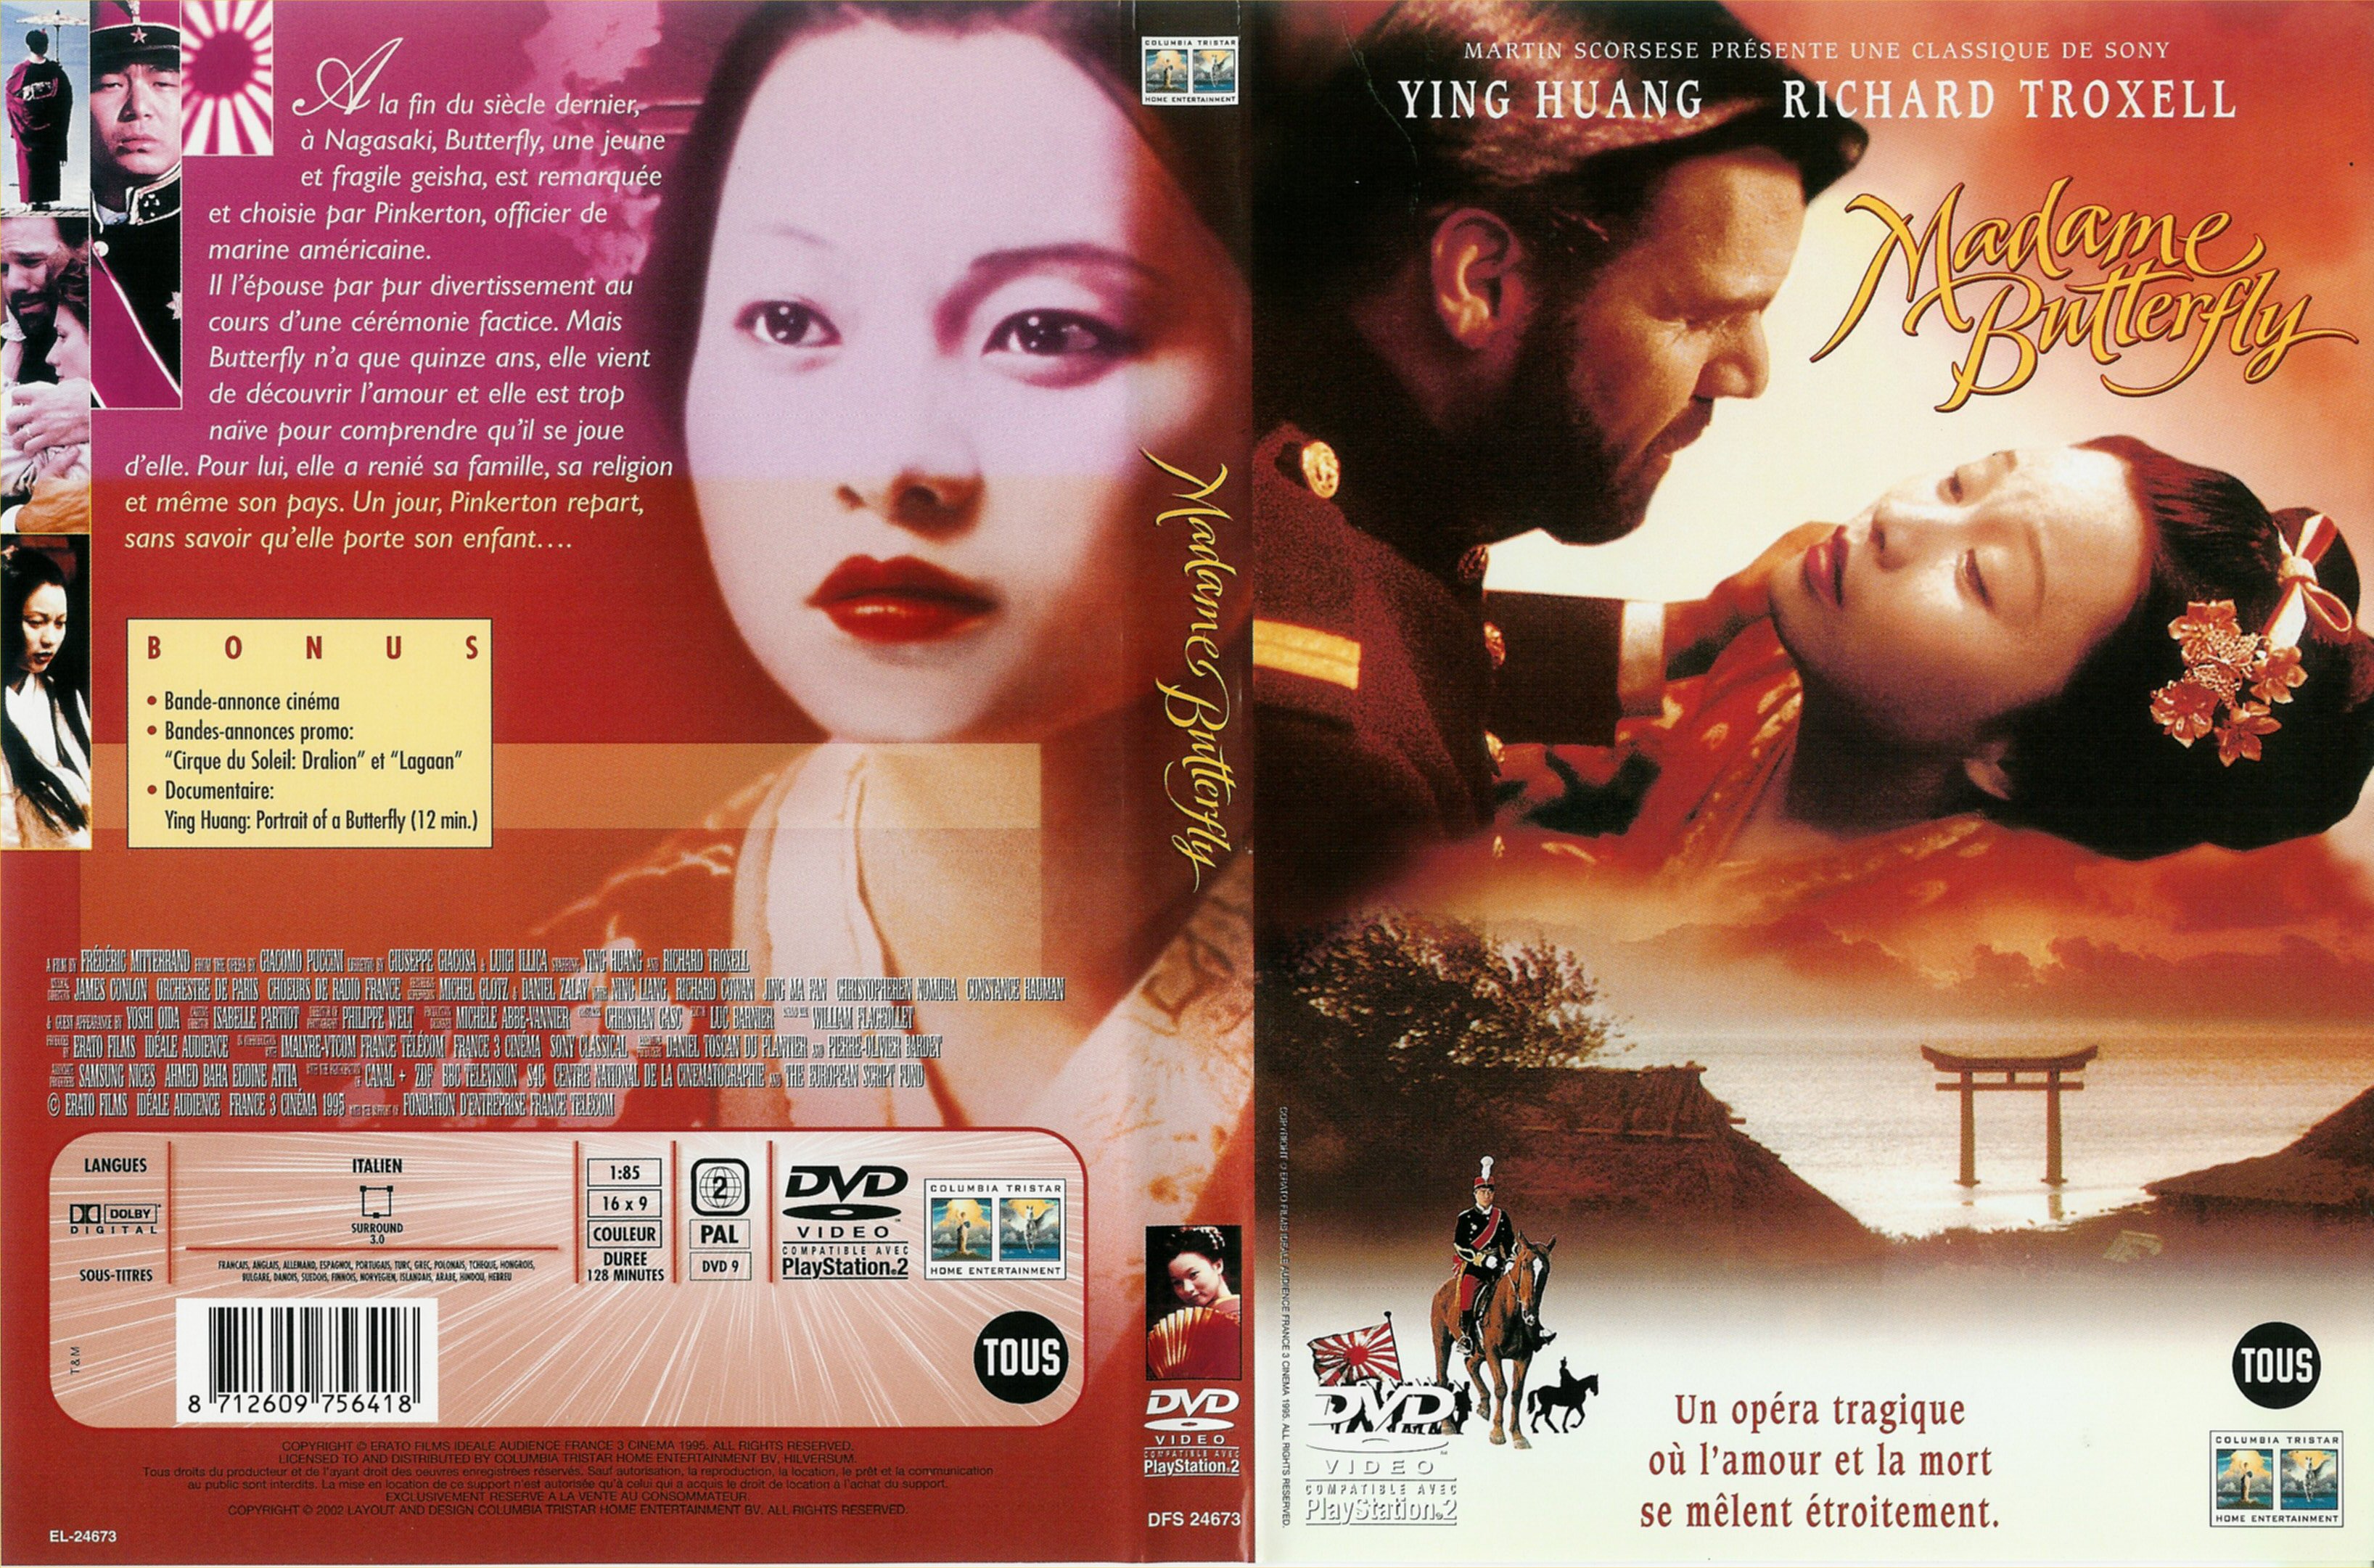 Jaquette DVD Madame Butterfly